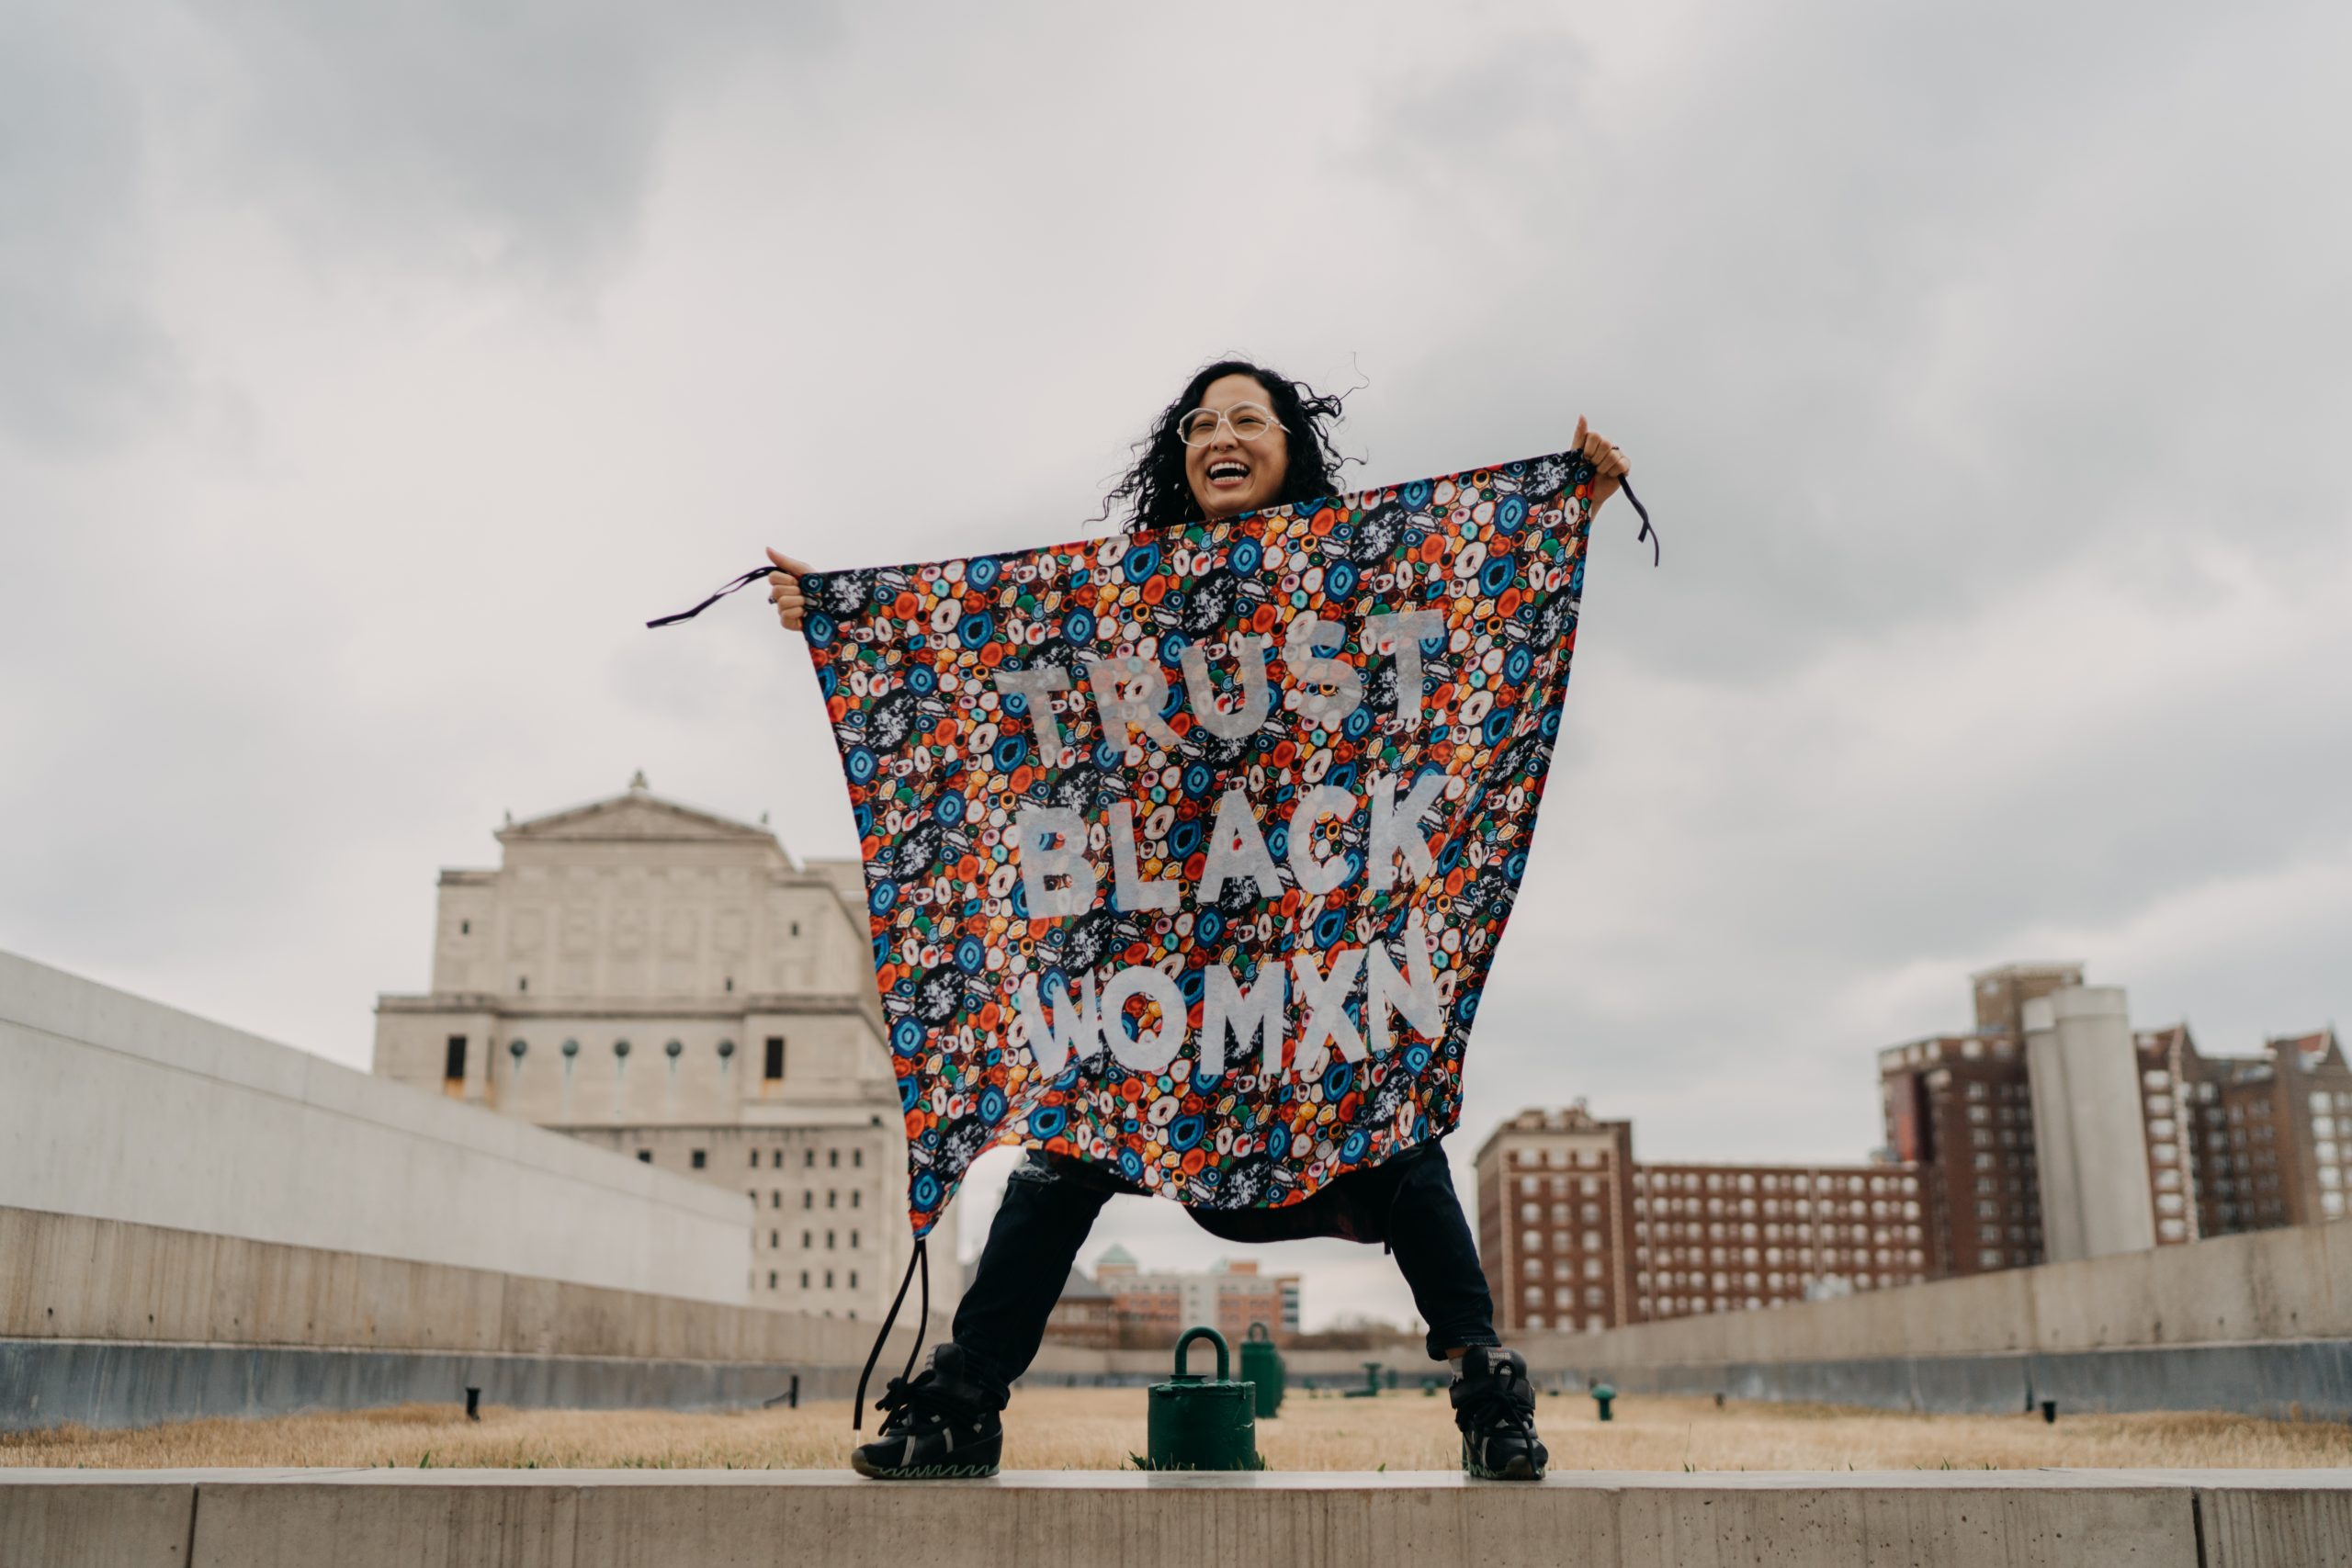 Aram Han Sifuentes is pictured standing on the rooftop of the Pulitzer Arts Foundation in St. Louis, Missouri. With an exuberant smile on her face, she has her feet spread far apart and her arms are outstretched holding a banner with bold white block letters against a busy abstract pattern that reads “Trust Black Womxn.” The banner is from her Protest Banner Lending Library and covers most of her body. Aram, a Korean American woman in her mid-thirties, has wavy long black hair and is dressed in black and wears white polygon-shaped wire-rim glasses.